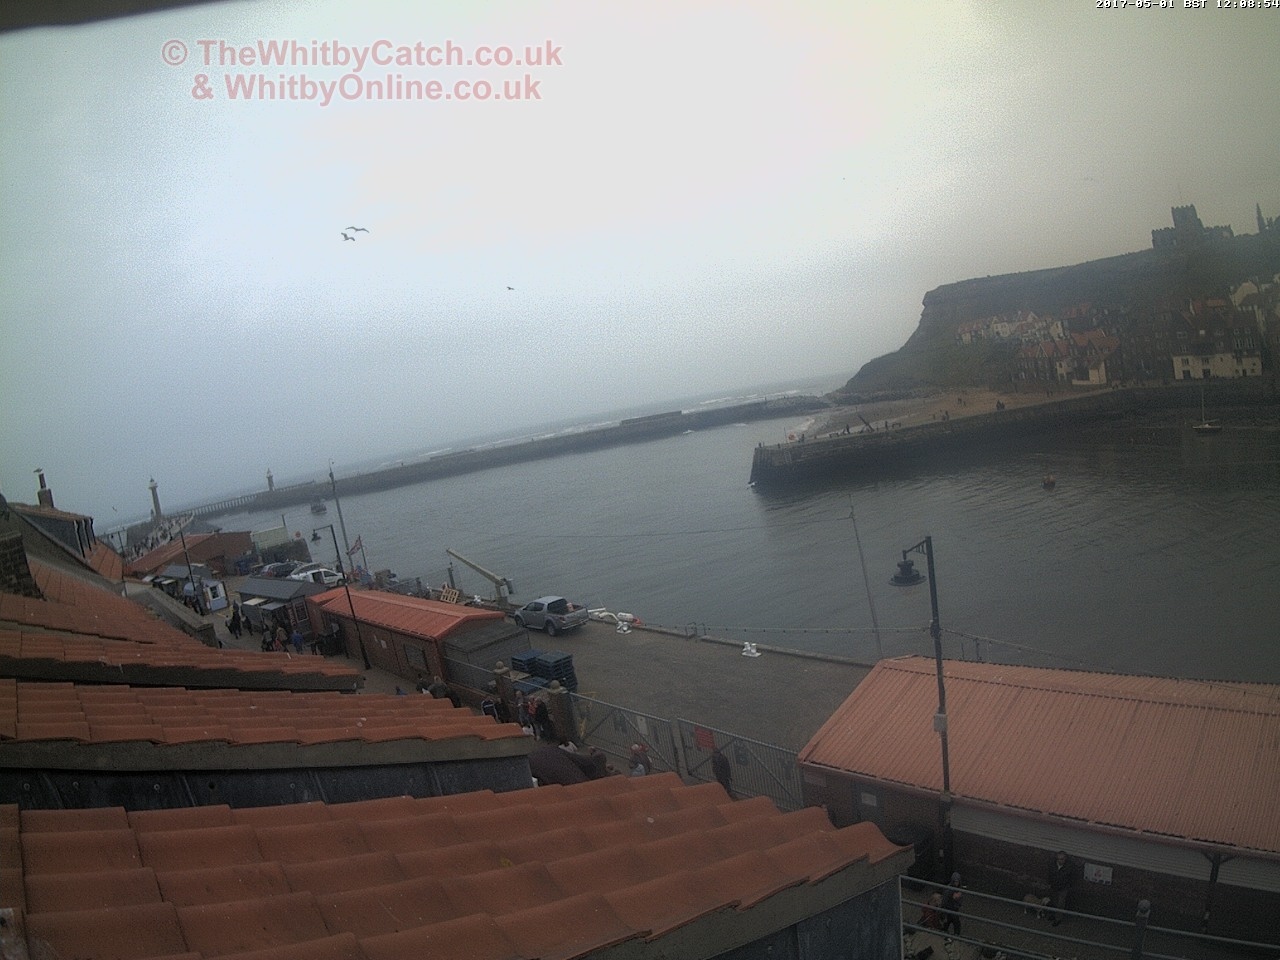 Whitby Mon 1st May 2017 12:09.